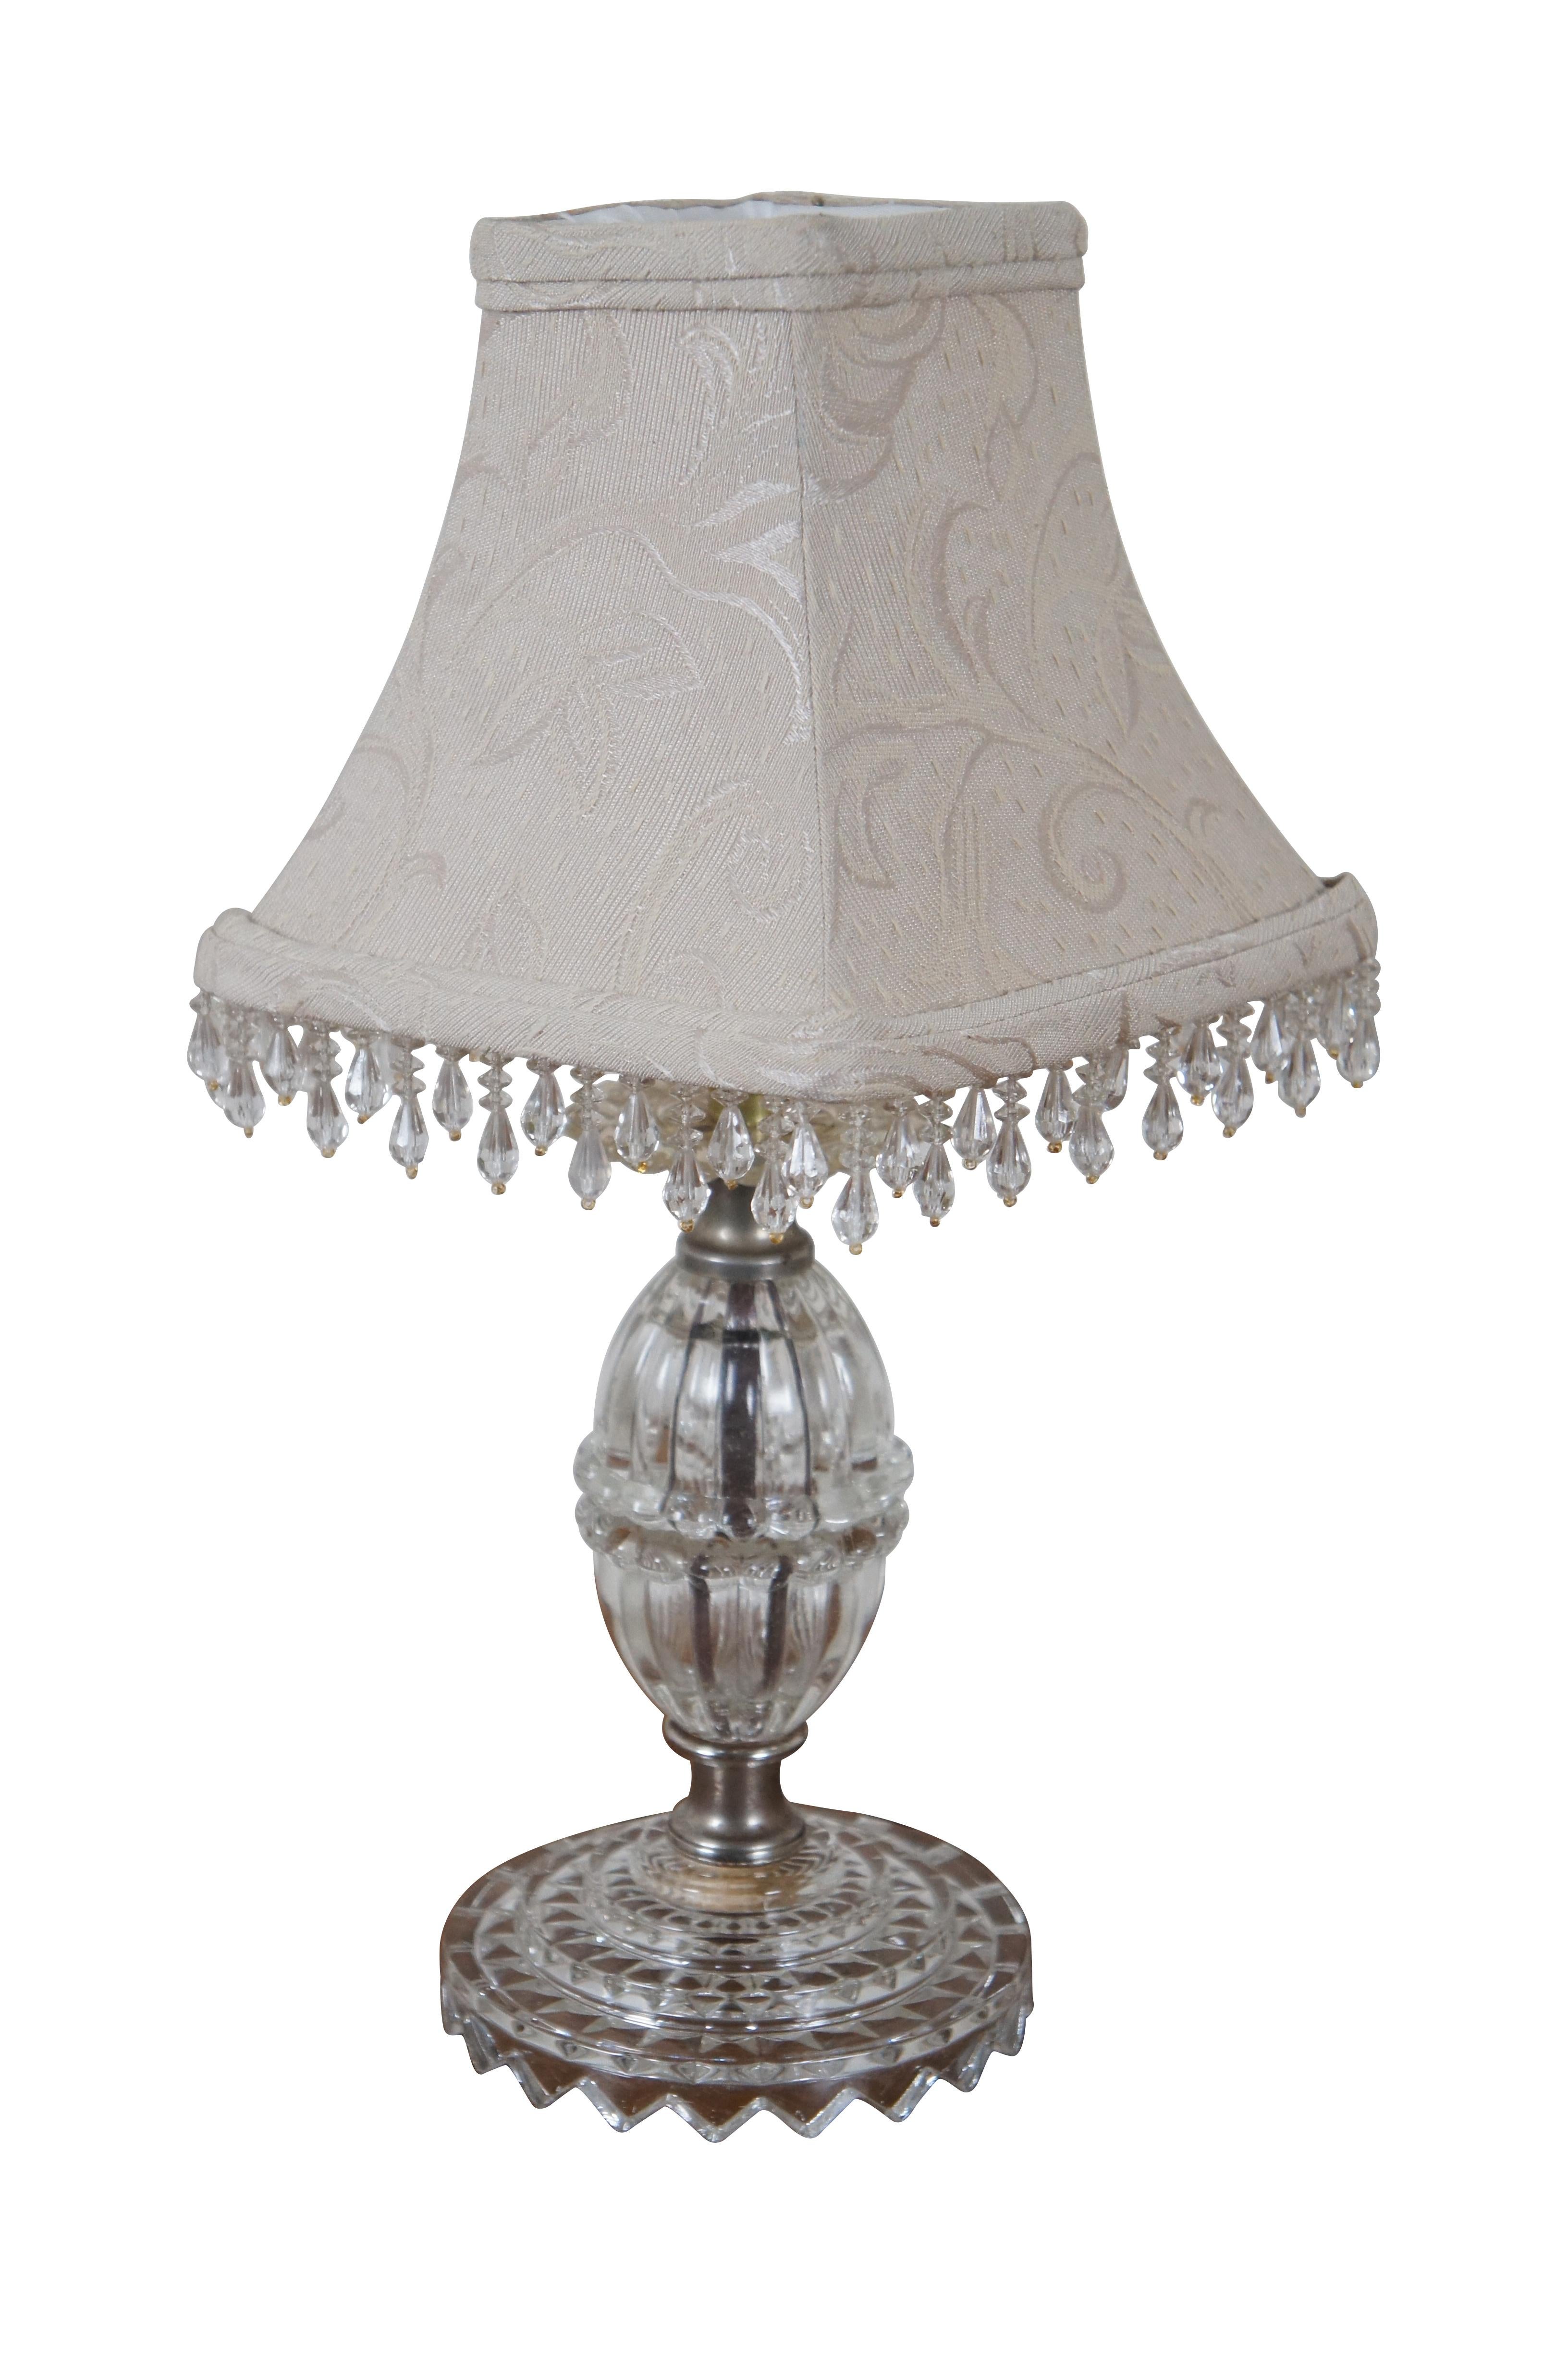 Pair of petite pressed glass Hollywood Regency budoir / table lamps circa mid 20th century, featuring tiered round sawtooth bases, fluted almond shaped body with bubble edge around the middle and topped with a bubble edge “drip catcher.” Lamps